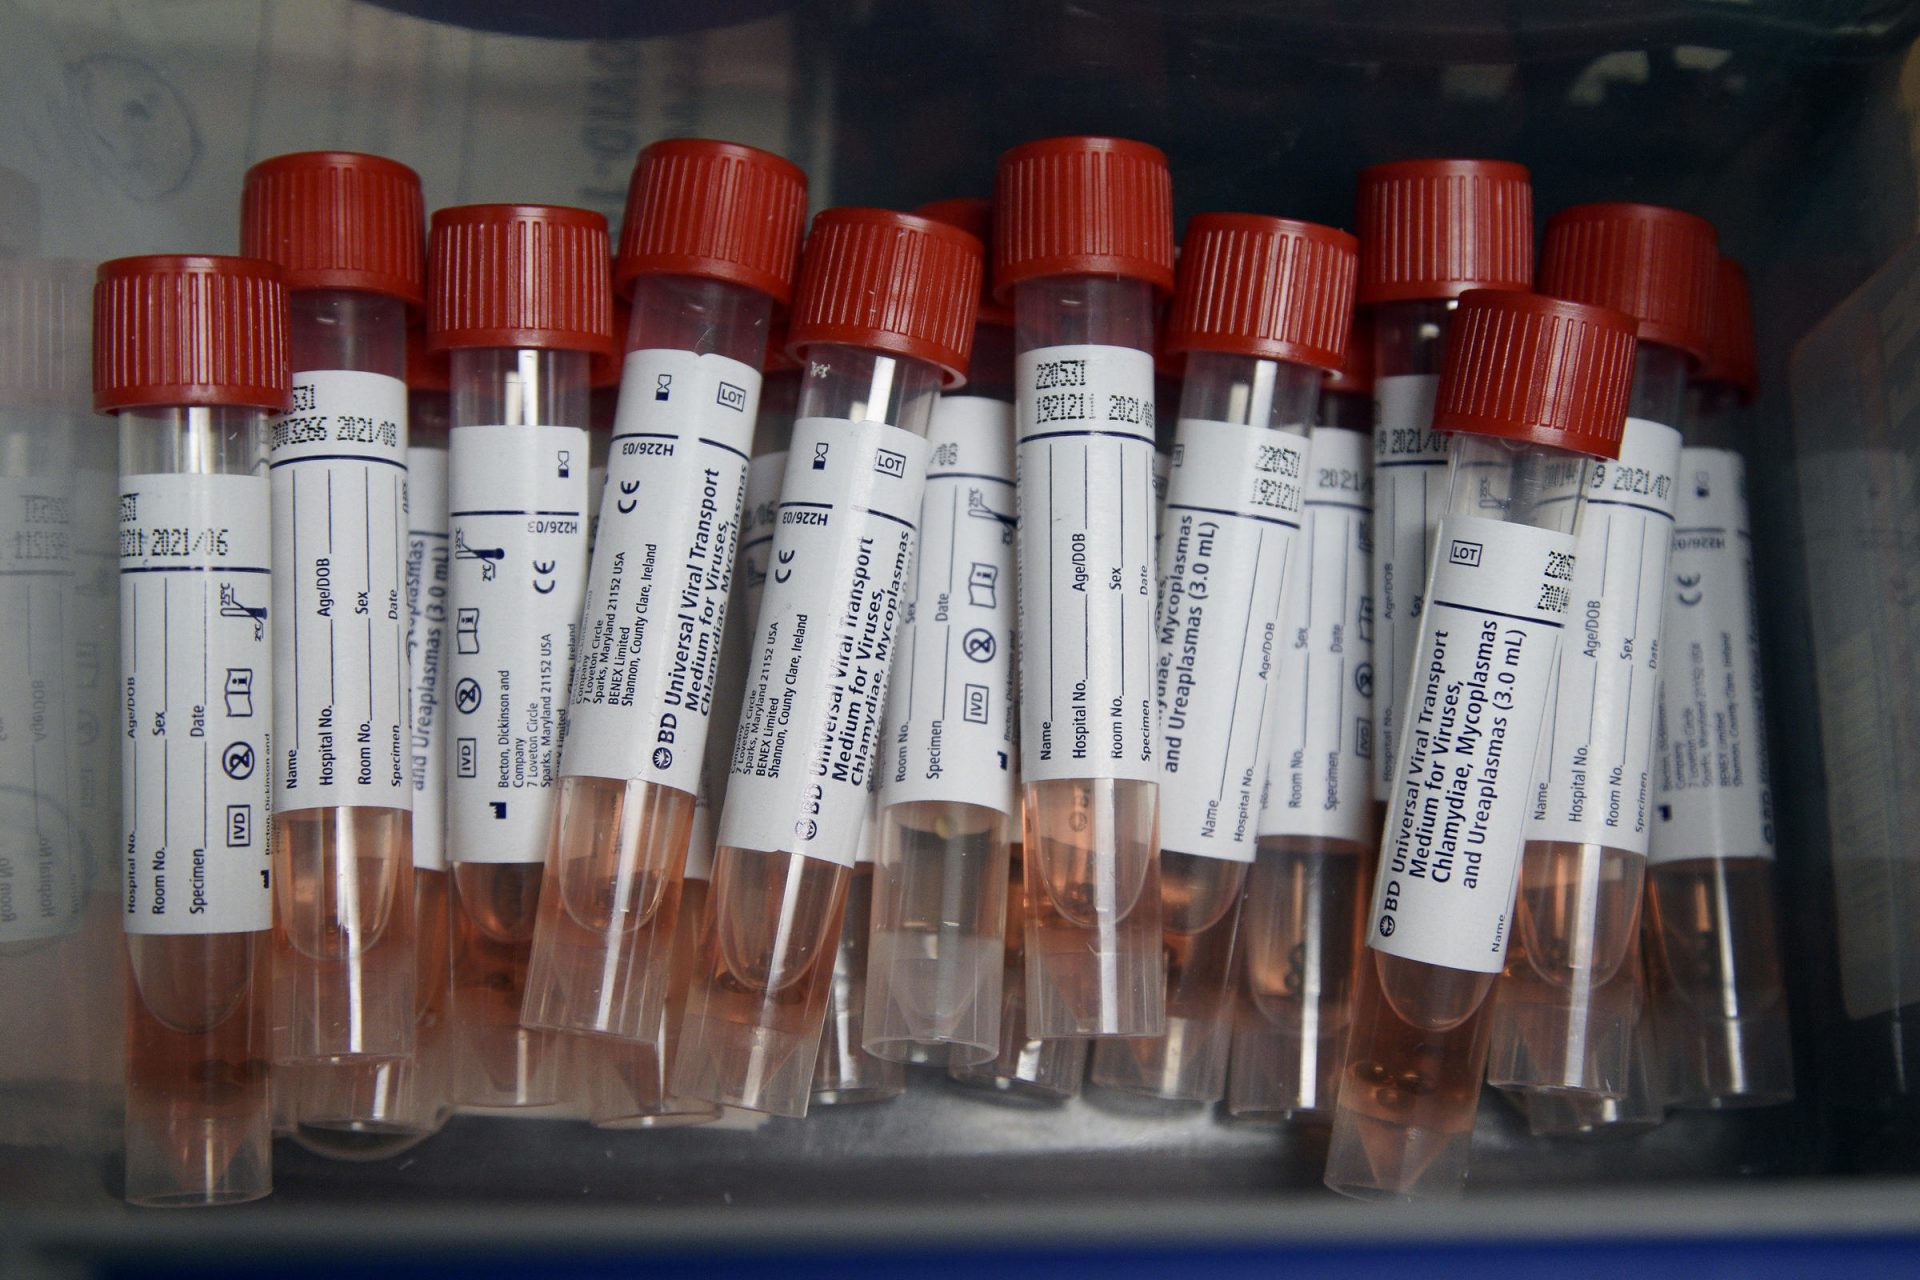 Vials used in the test to detect the presence of COVID-19 are seen at a testing site affiliated with the Methodist Health System, in Omaha, Neb., Friday, April 24, 2020. (AP Photo/Nati Harnik)